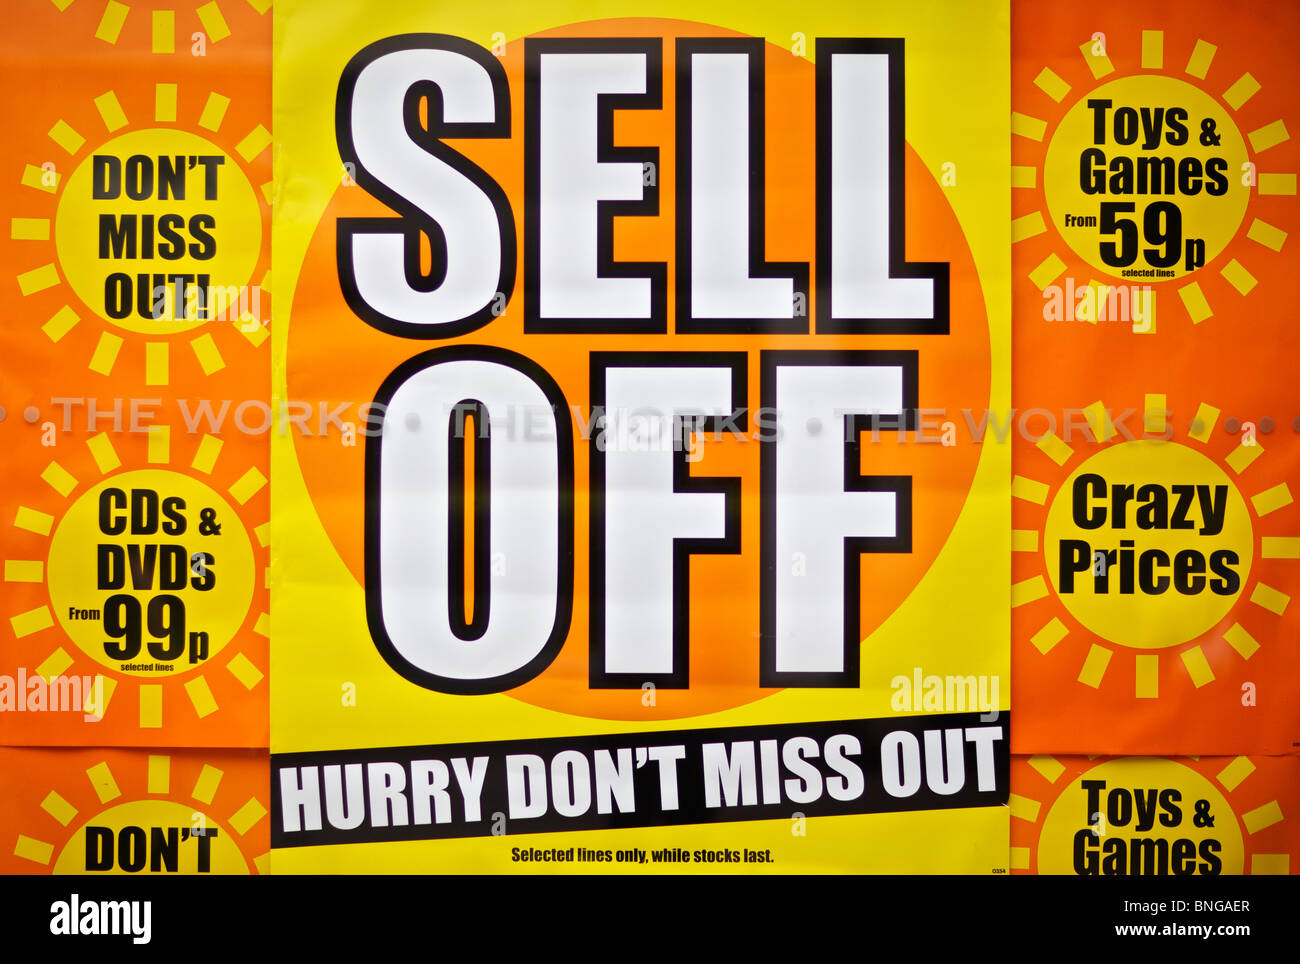 Sell off stock sale poster in shop window on High Street Stock Photo